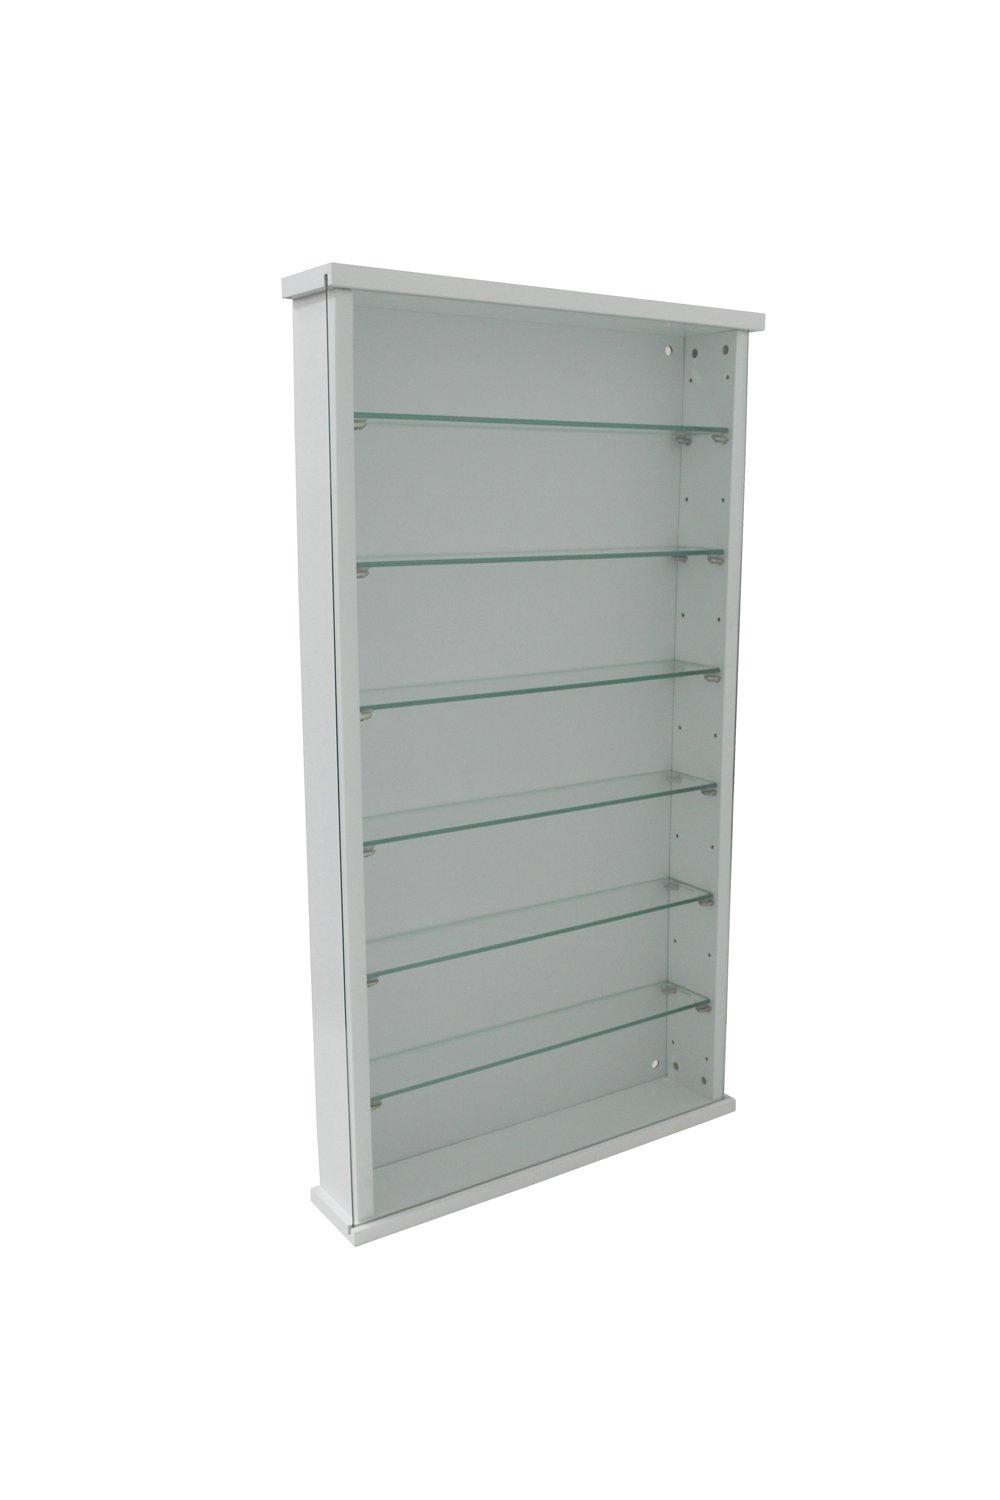 'Exhibit'  Solid Wood 6 Shelf Glass Wall Display Cabinet  White